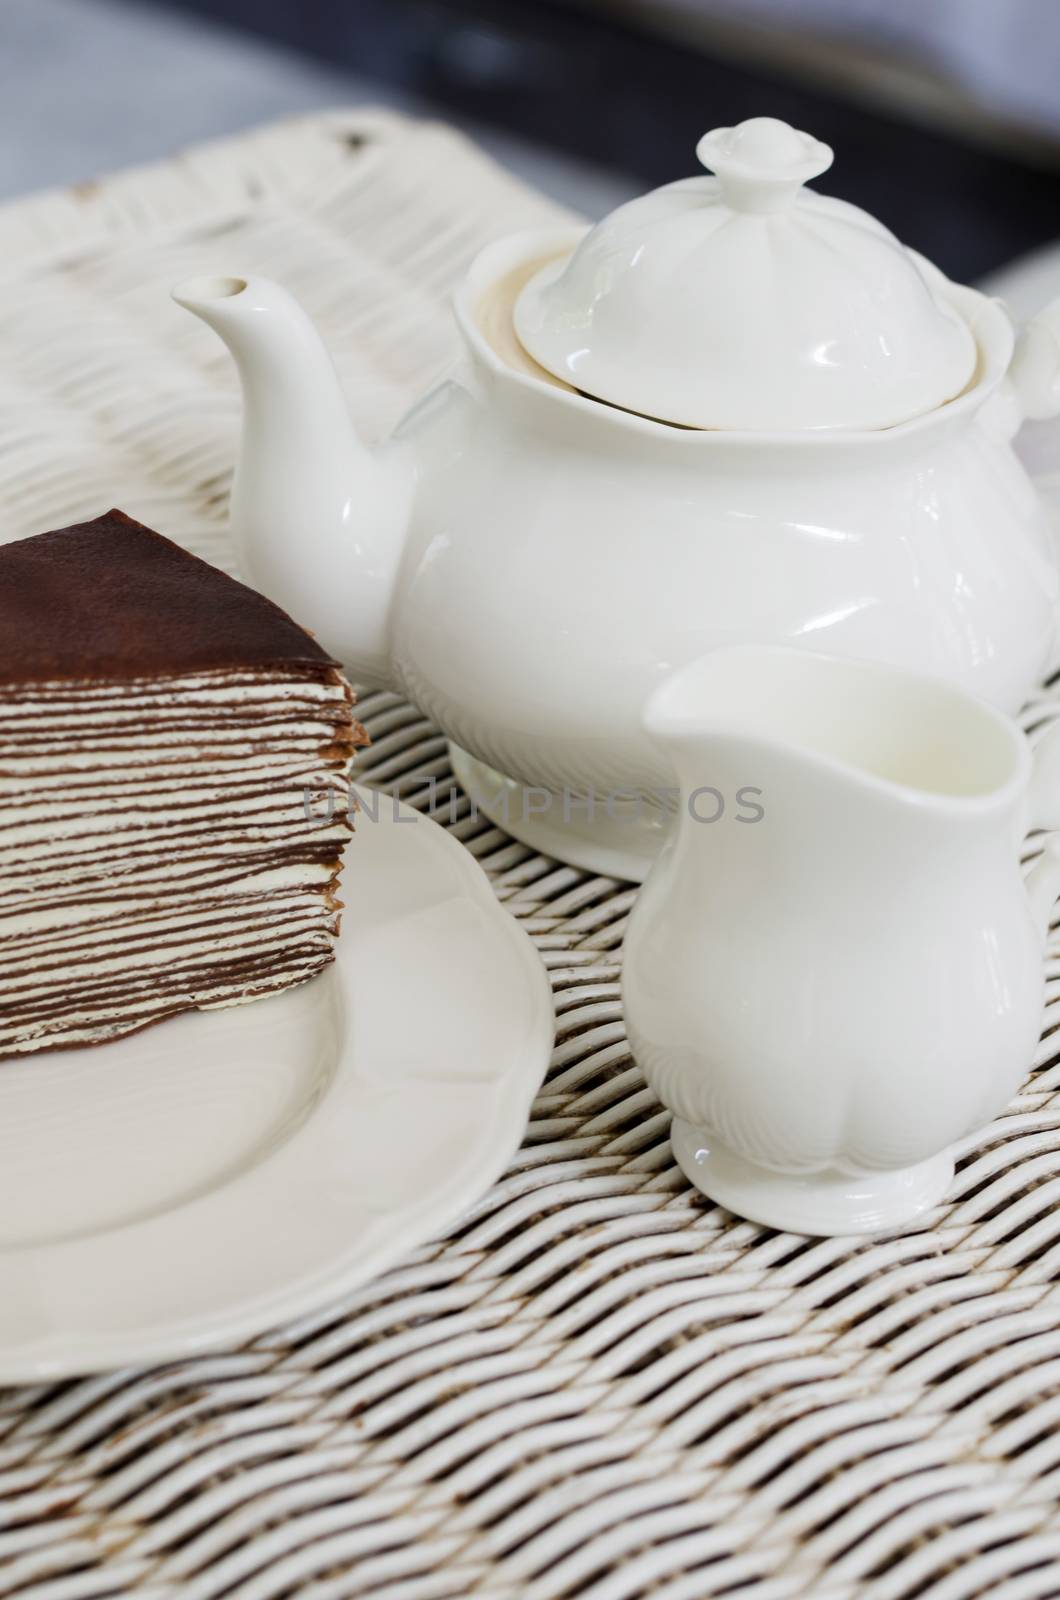 Teapot with chocolate crape cake on weave texture table